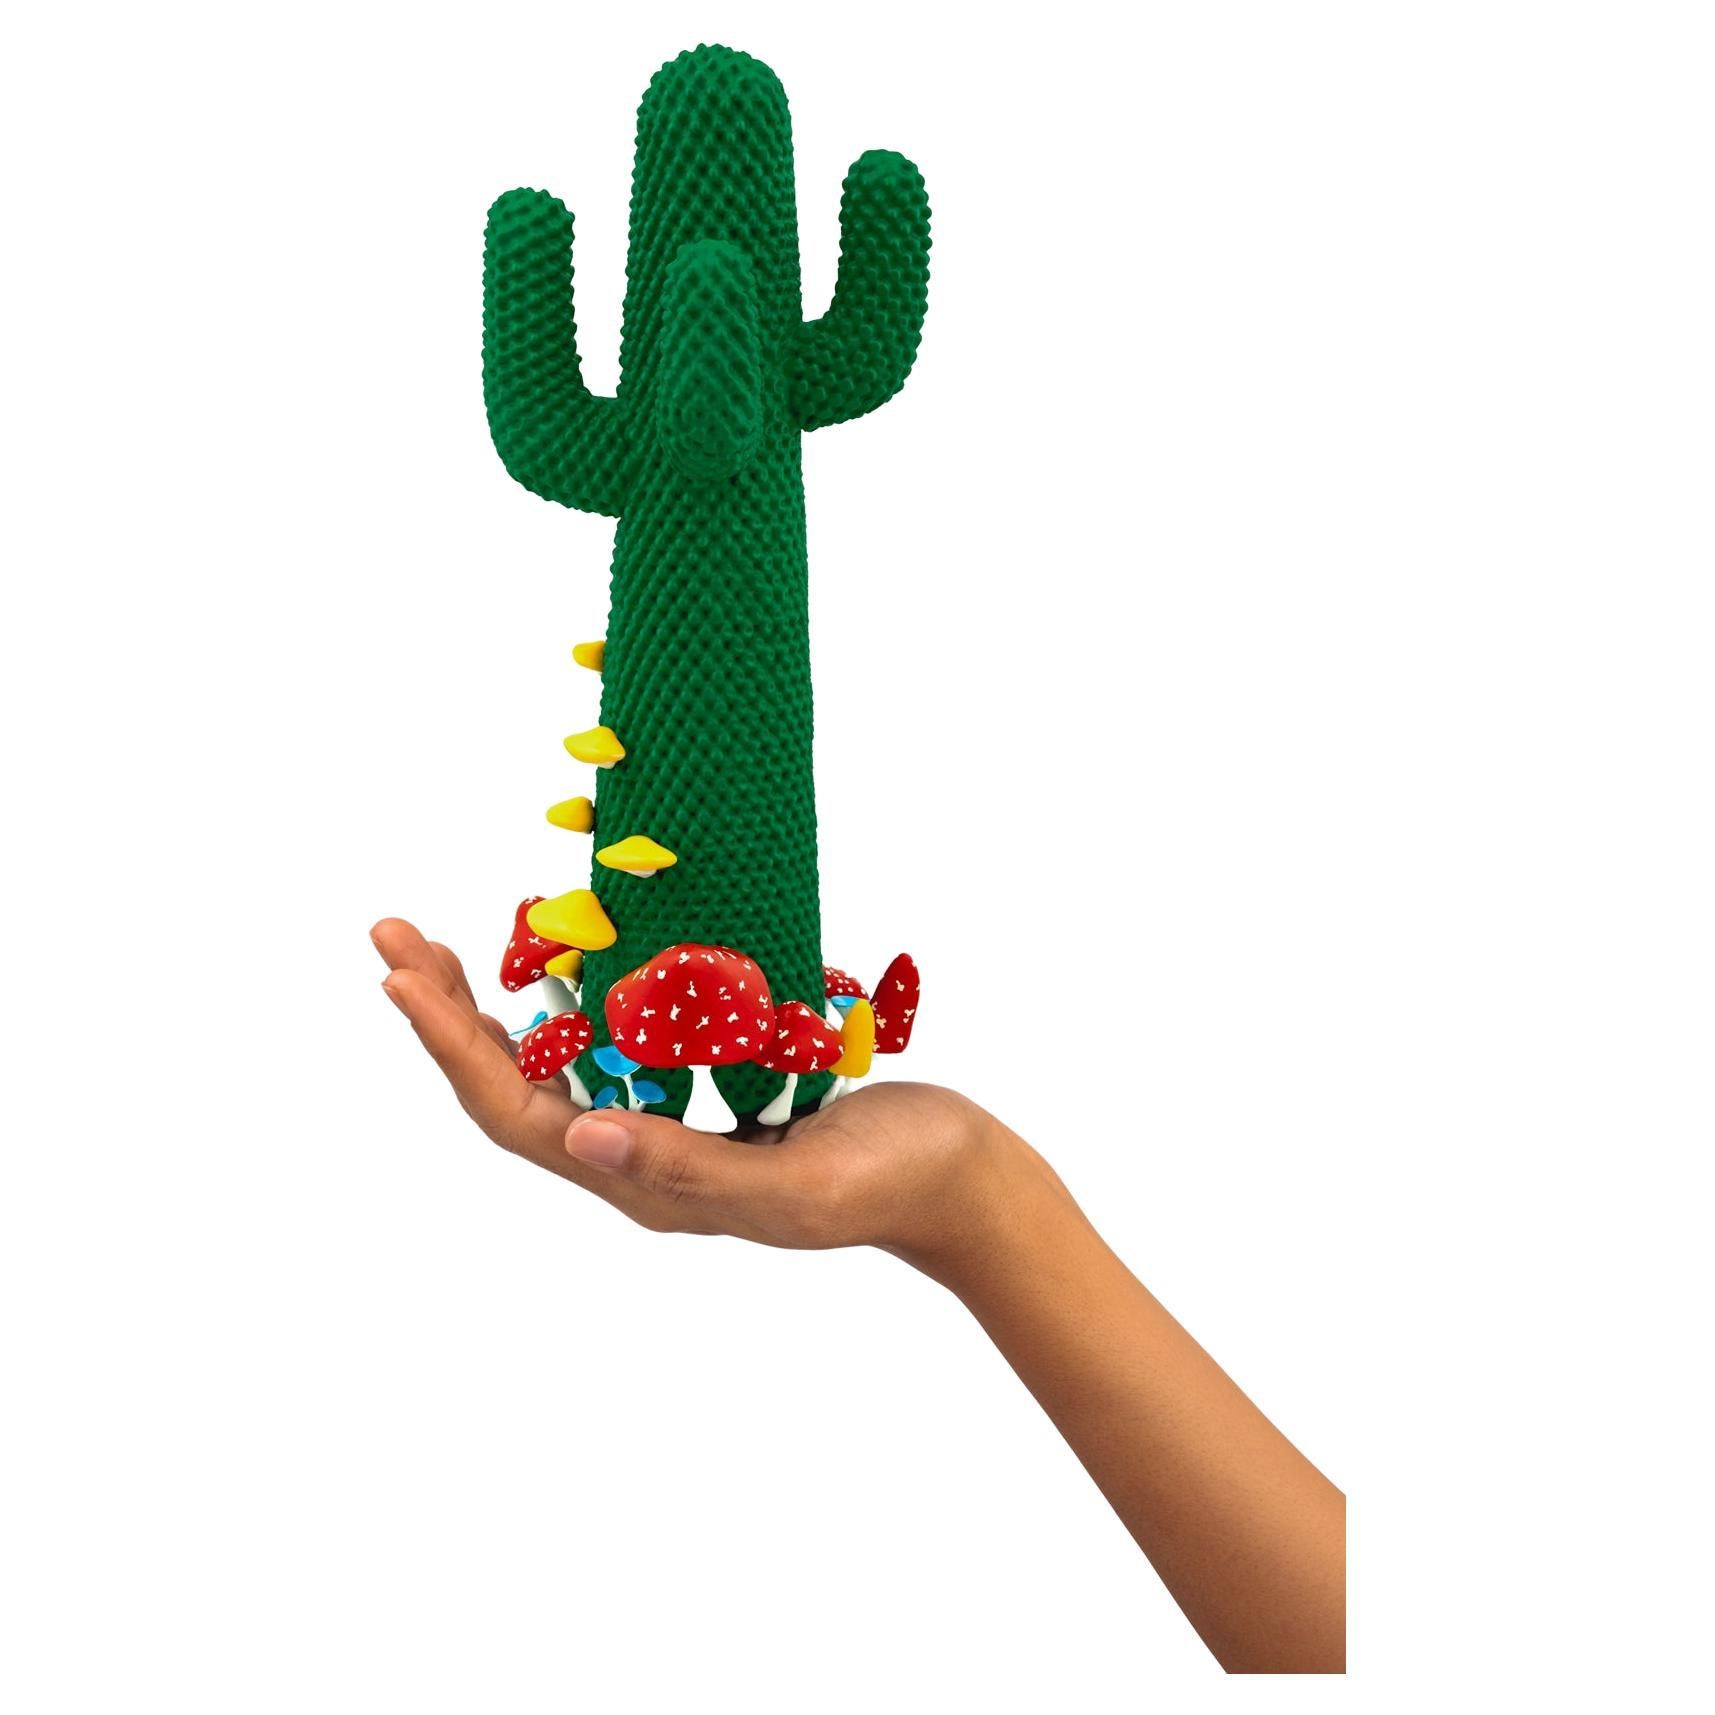 LIMITED EDITION #42/99

Gufram presents the miniaturised version of the Shroom CACTUS® created in collaboration with A$AP Rocky and the artist’s new design studio HOMMEMADE Exactly as the real-size Shroom CACTUS®, the new Guframini piece features